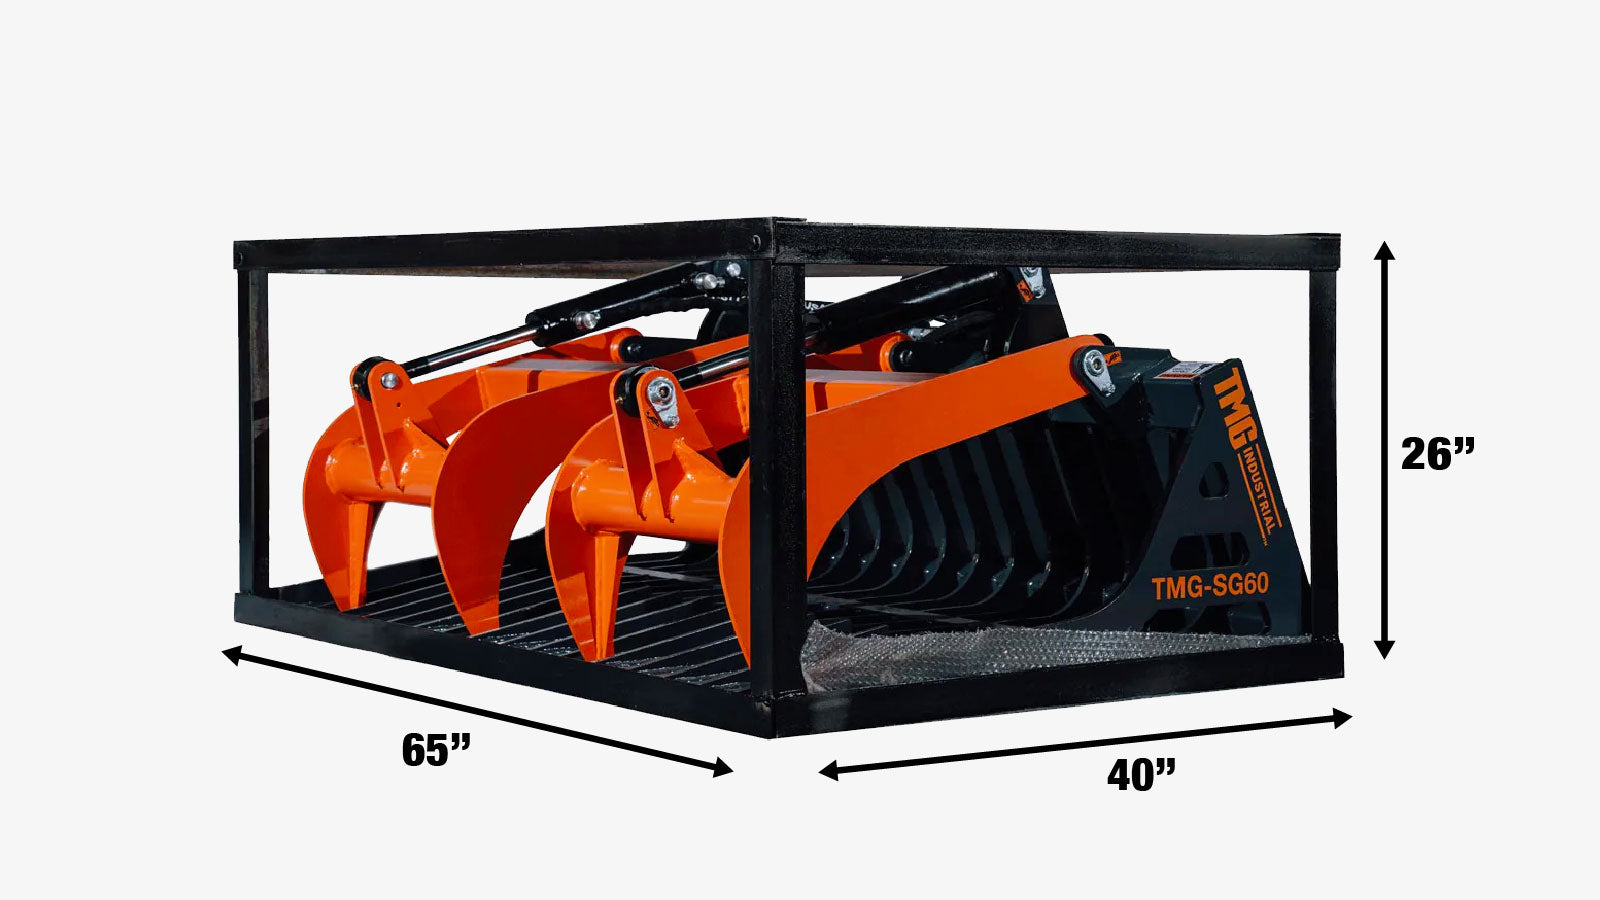 TMG Industrial 60” Skid Steer Skeleton Grapple Attachment, Universal Mount, 34” Arm Opening, 3” Tine Spacing, 2600 lb Weight Capacity, TMG-SG60-shipping-info-image